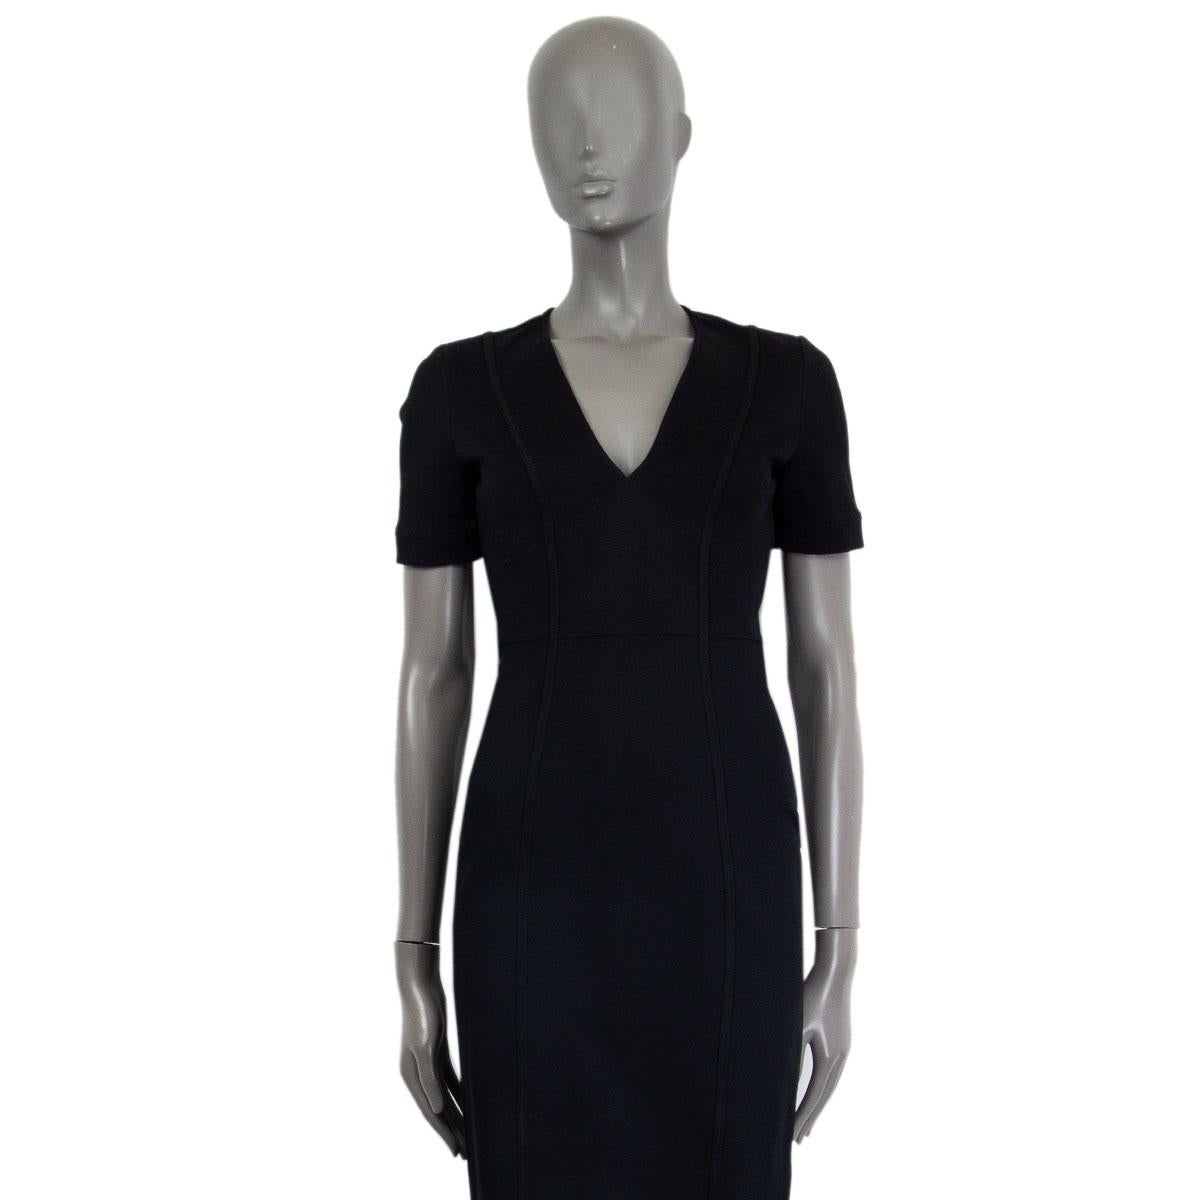 100% authentic Gucci short sleeve bodycon dress in black viscose (80%), polyamide (14%) and elastane (6%) with a deep v-neck. Closes on the back with a concealed zipper. Unlined. Missing a belt. Has been worn and is in excellent